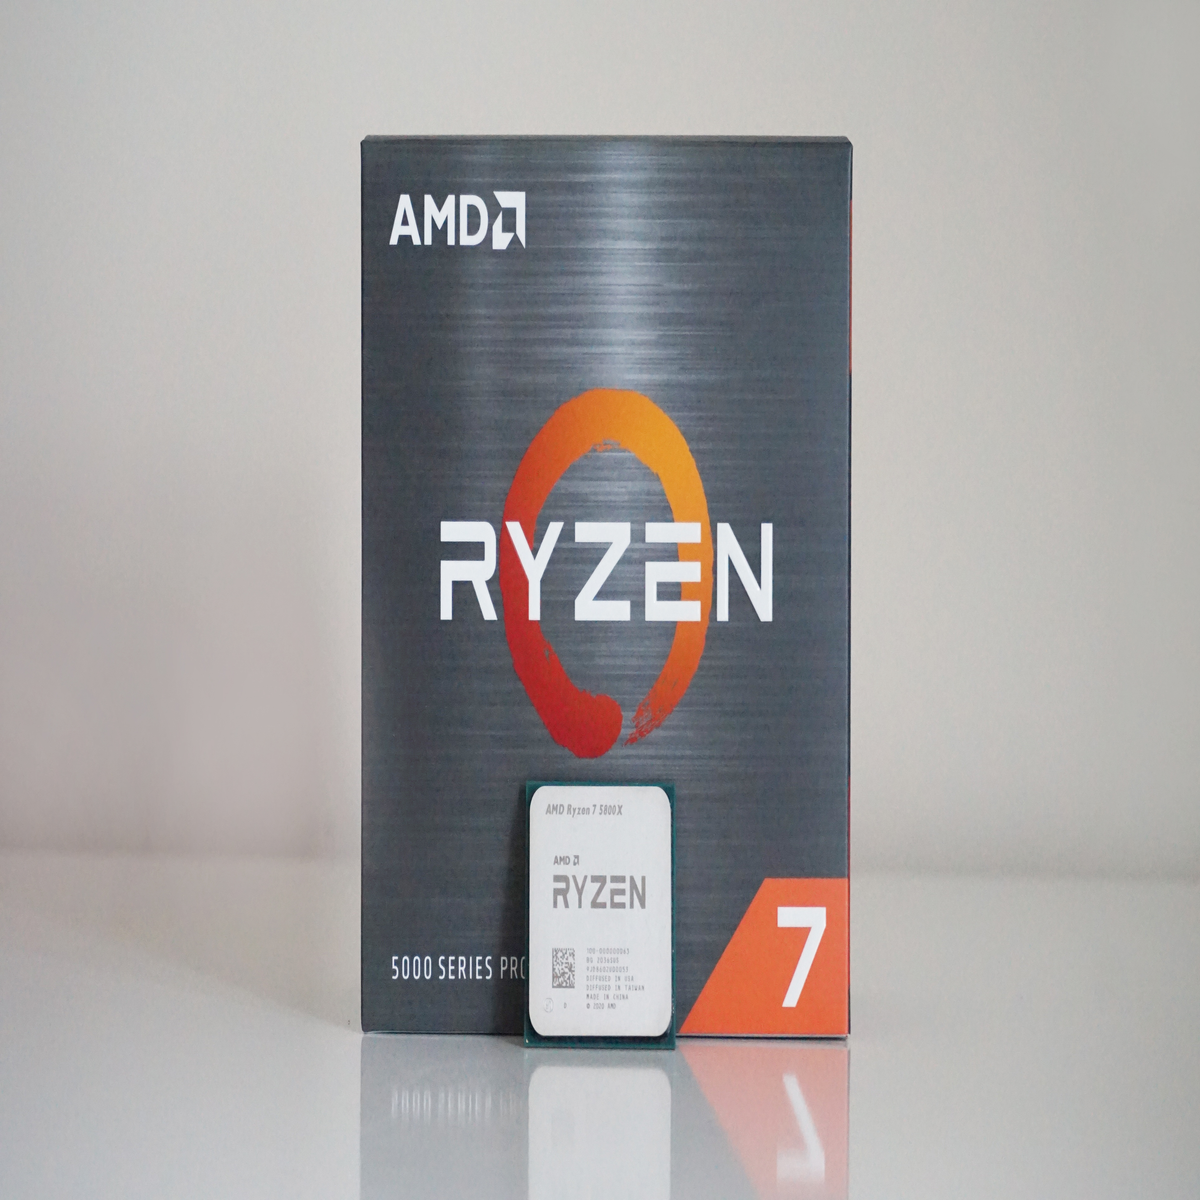 AMD's Ryzen 7 5800X is an even better value gaming CPU than the